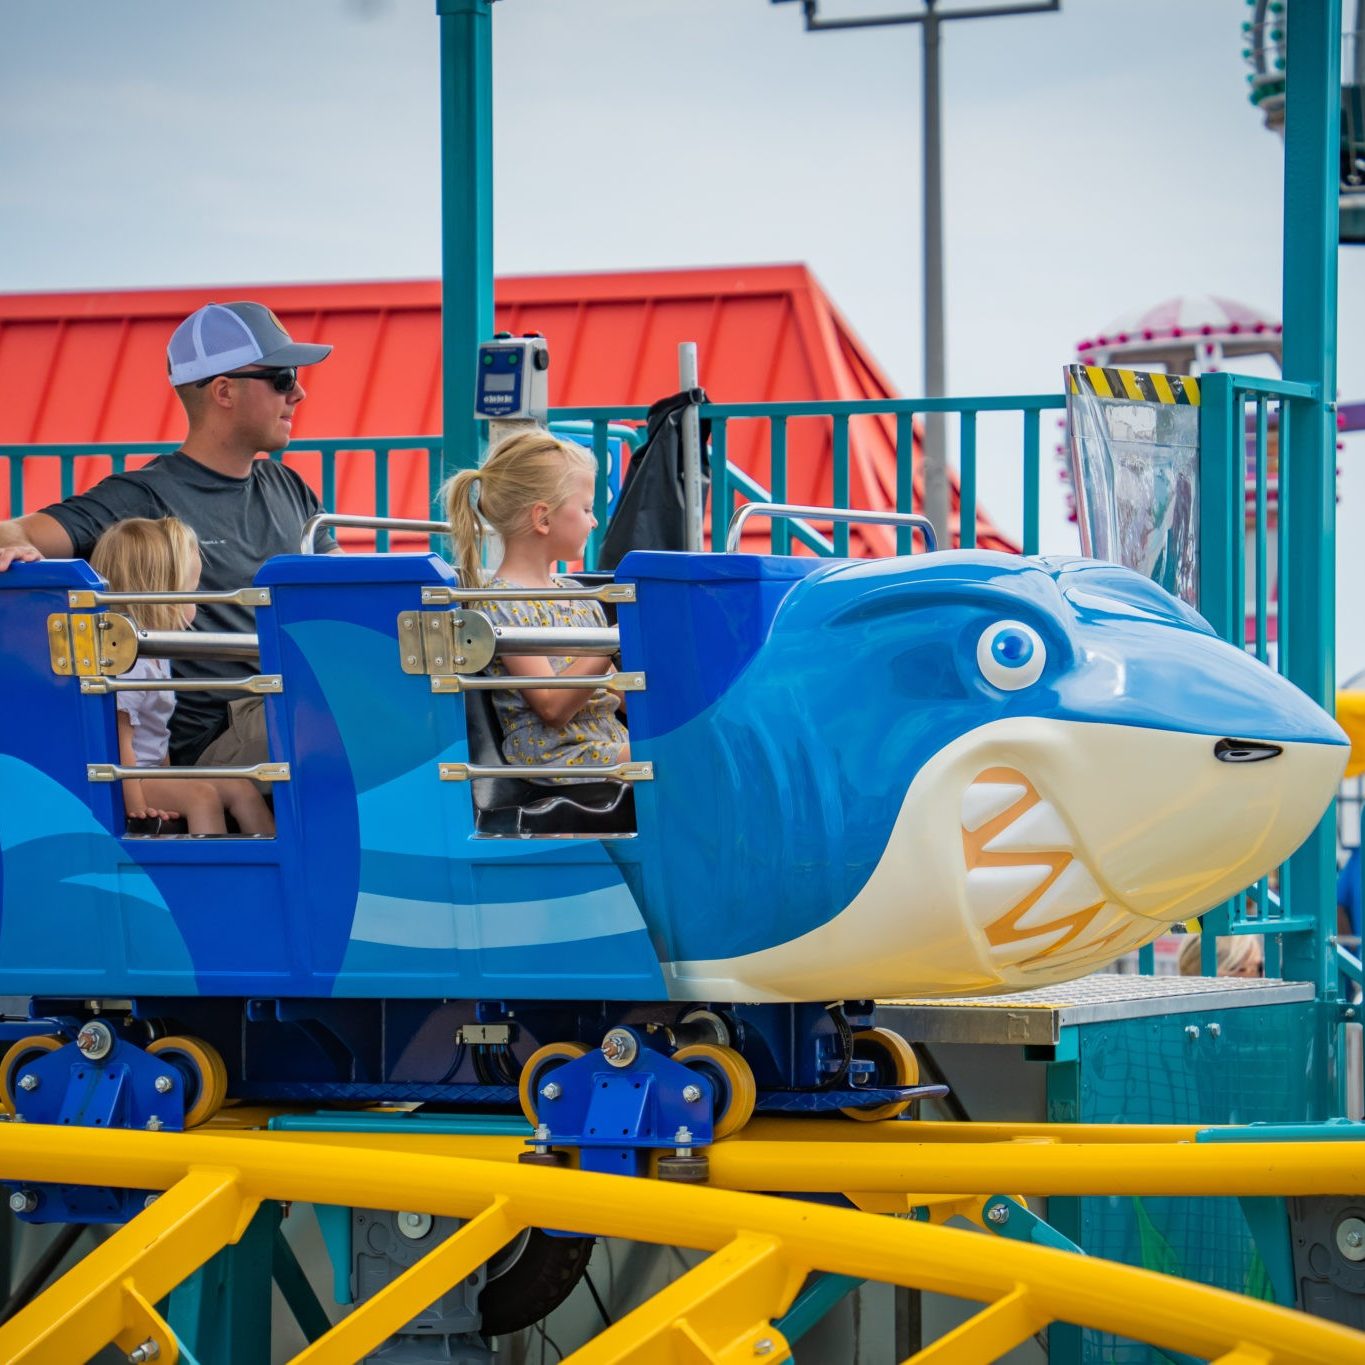 A family enjoys our new for 2022 Shark Escape Ride at Jenkinson's Boardwalk